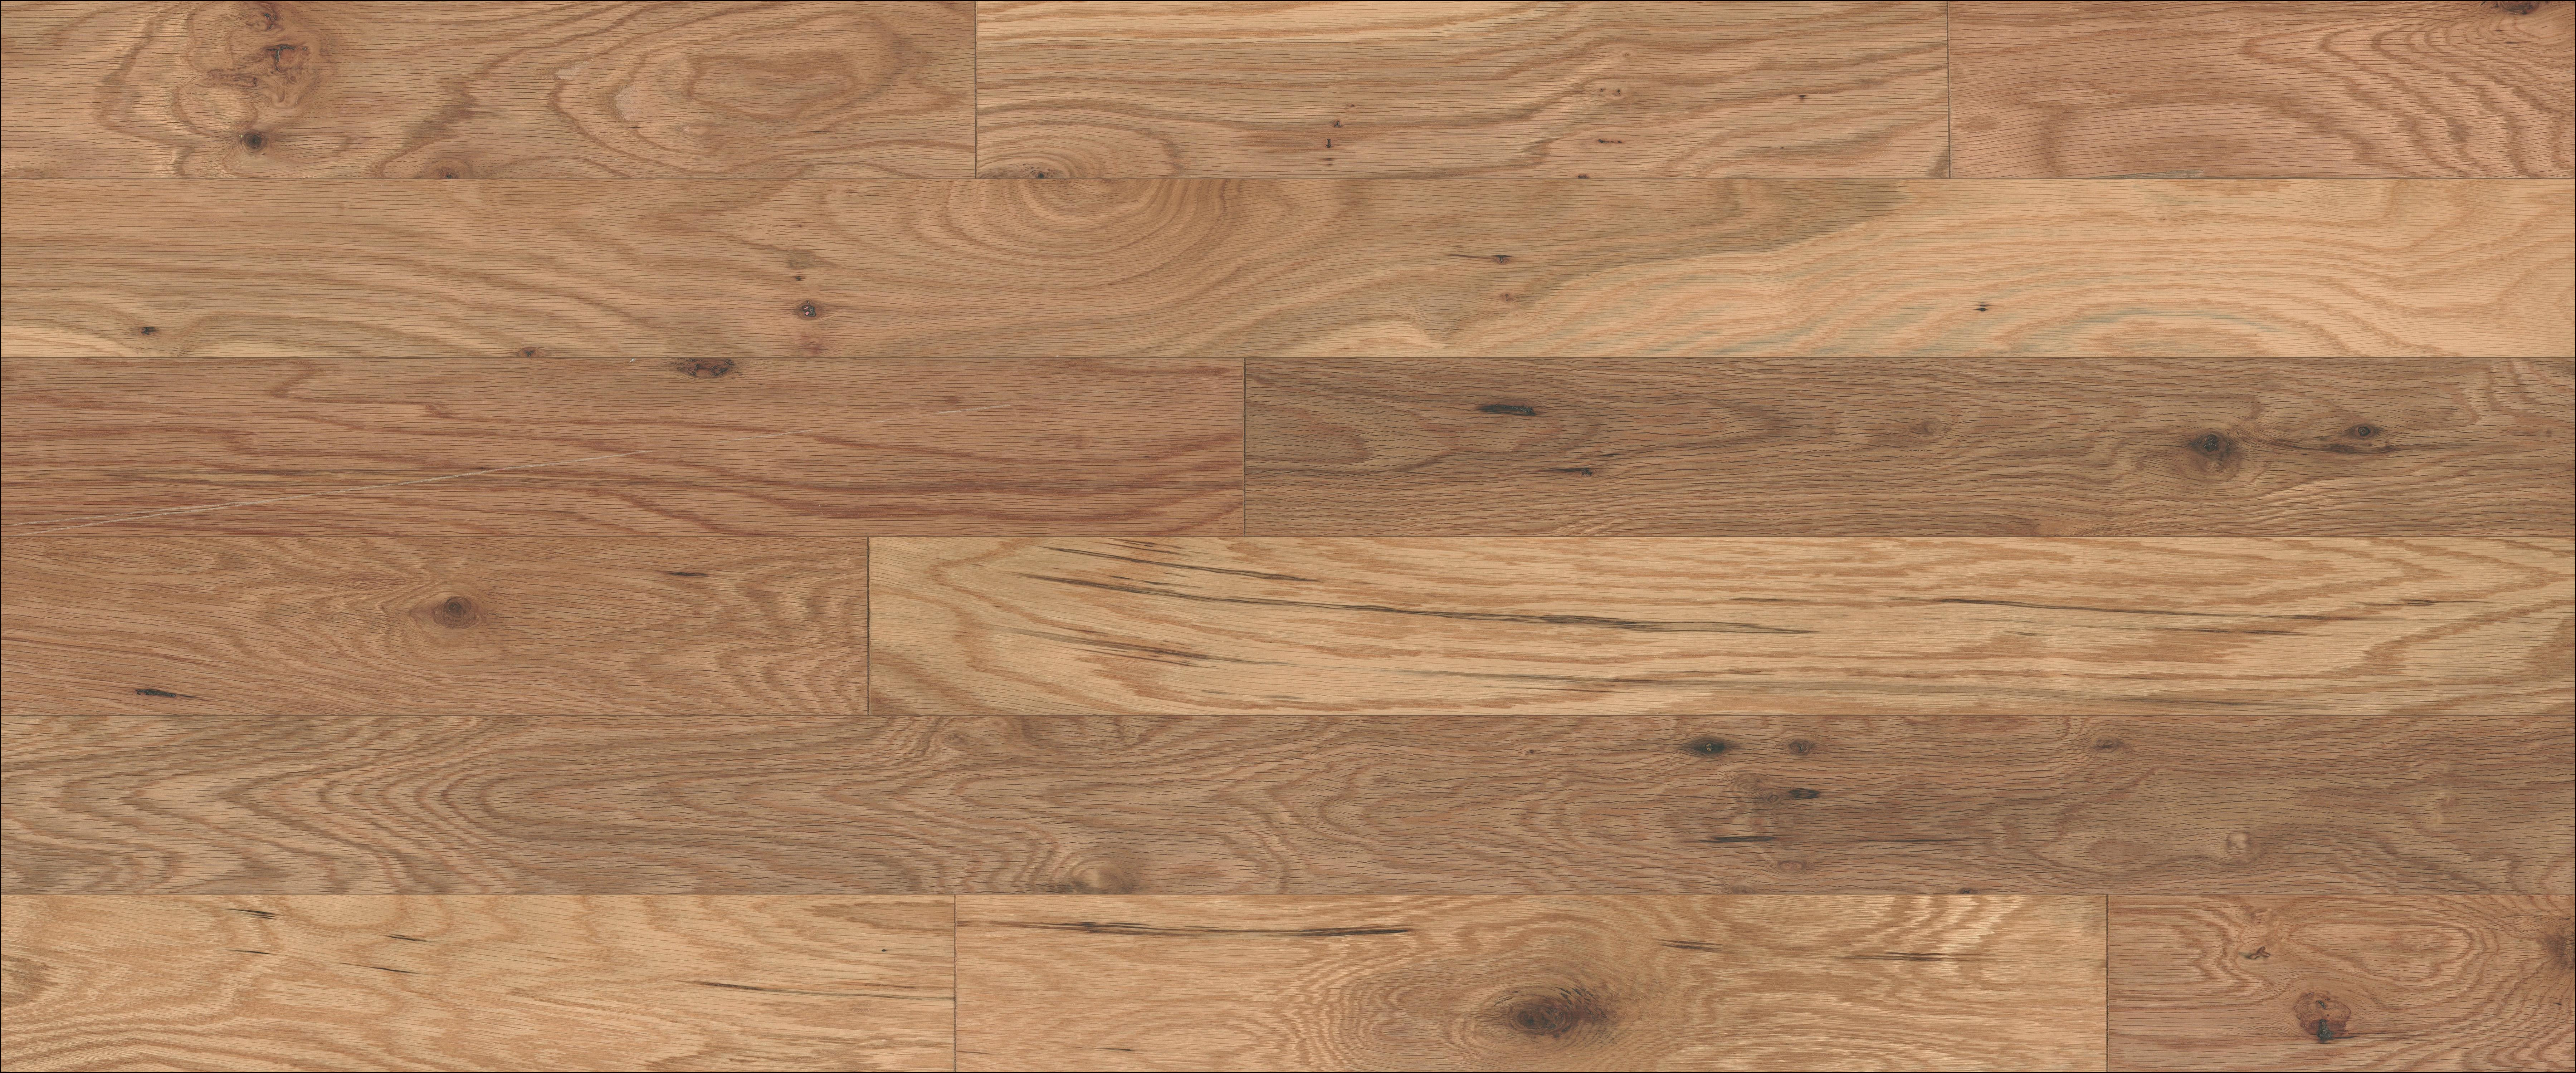 25 Lovable 7 Inch Wide Engineered Hardwood Flooring 2024 free download 7 inch wide engineered hardwood flooring of wide plank flooring ideas with regard to wide plank white oak wood flooring galerie mullican ridgecrest white oak natural 1 2 thick